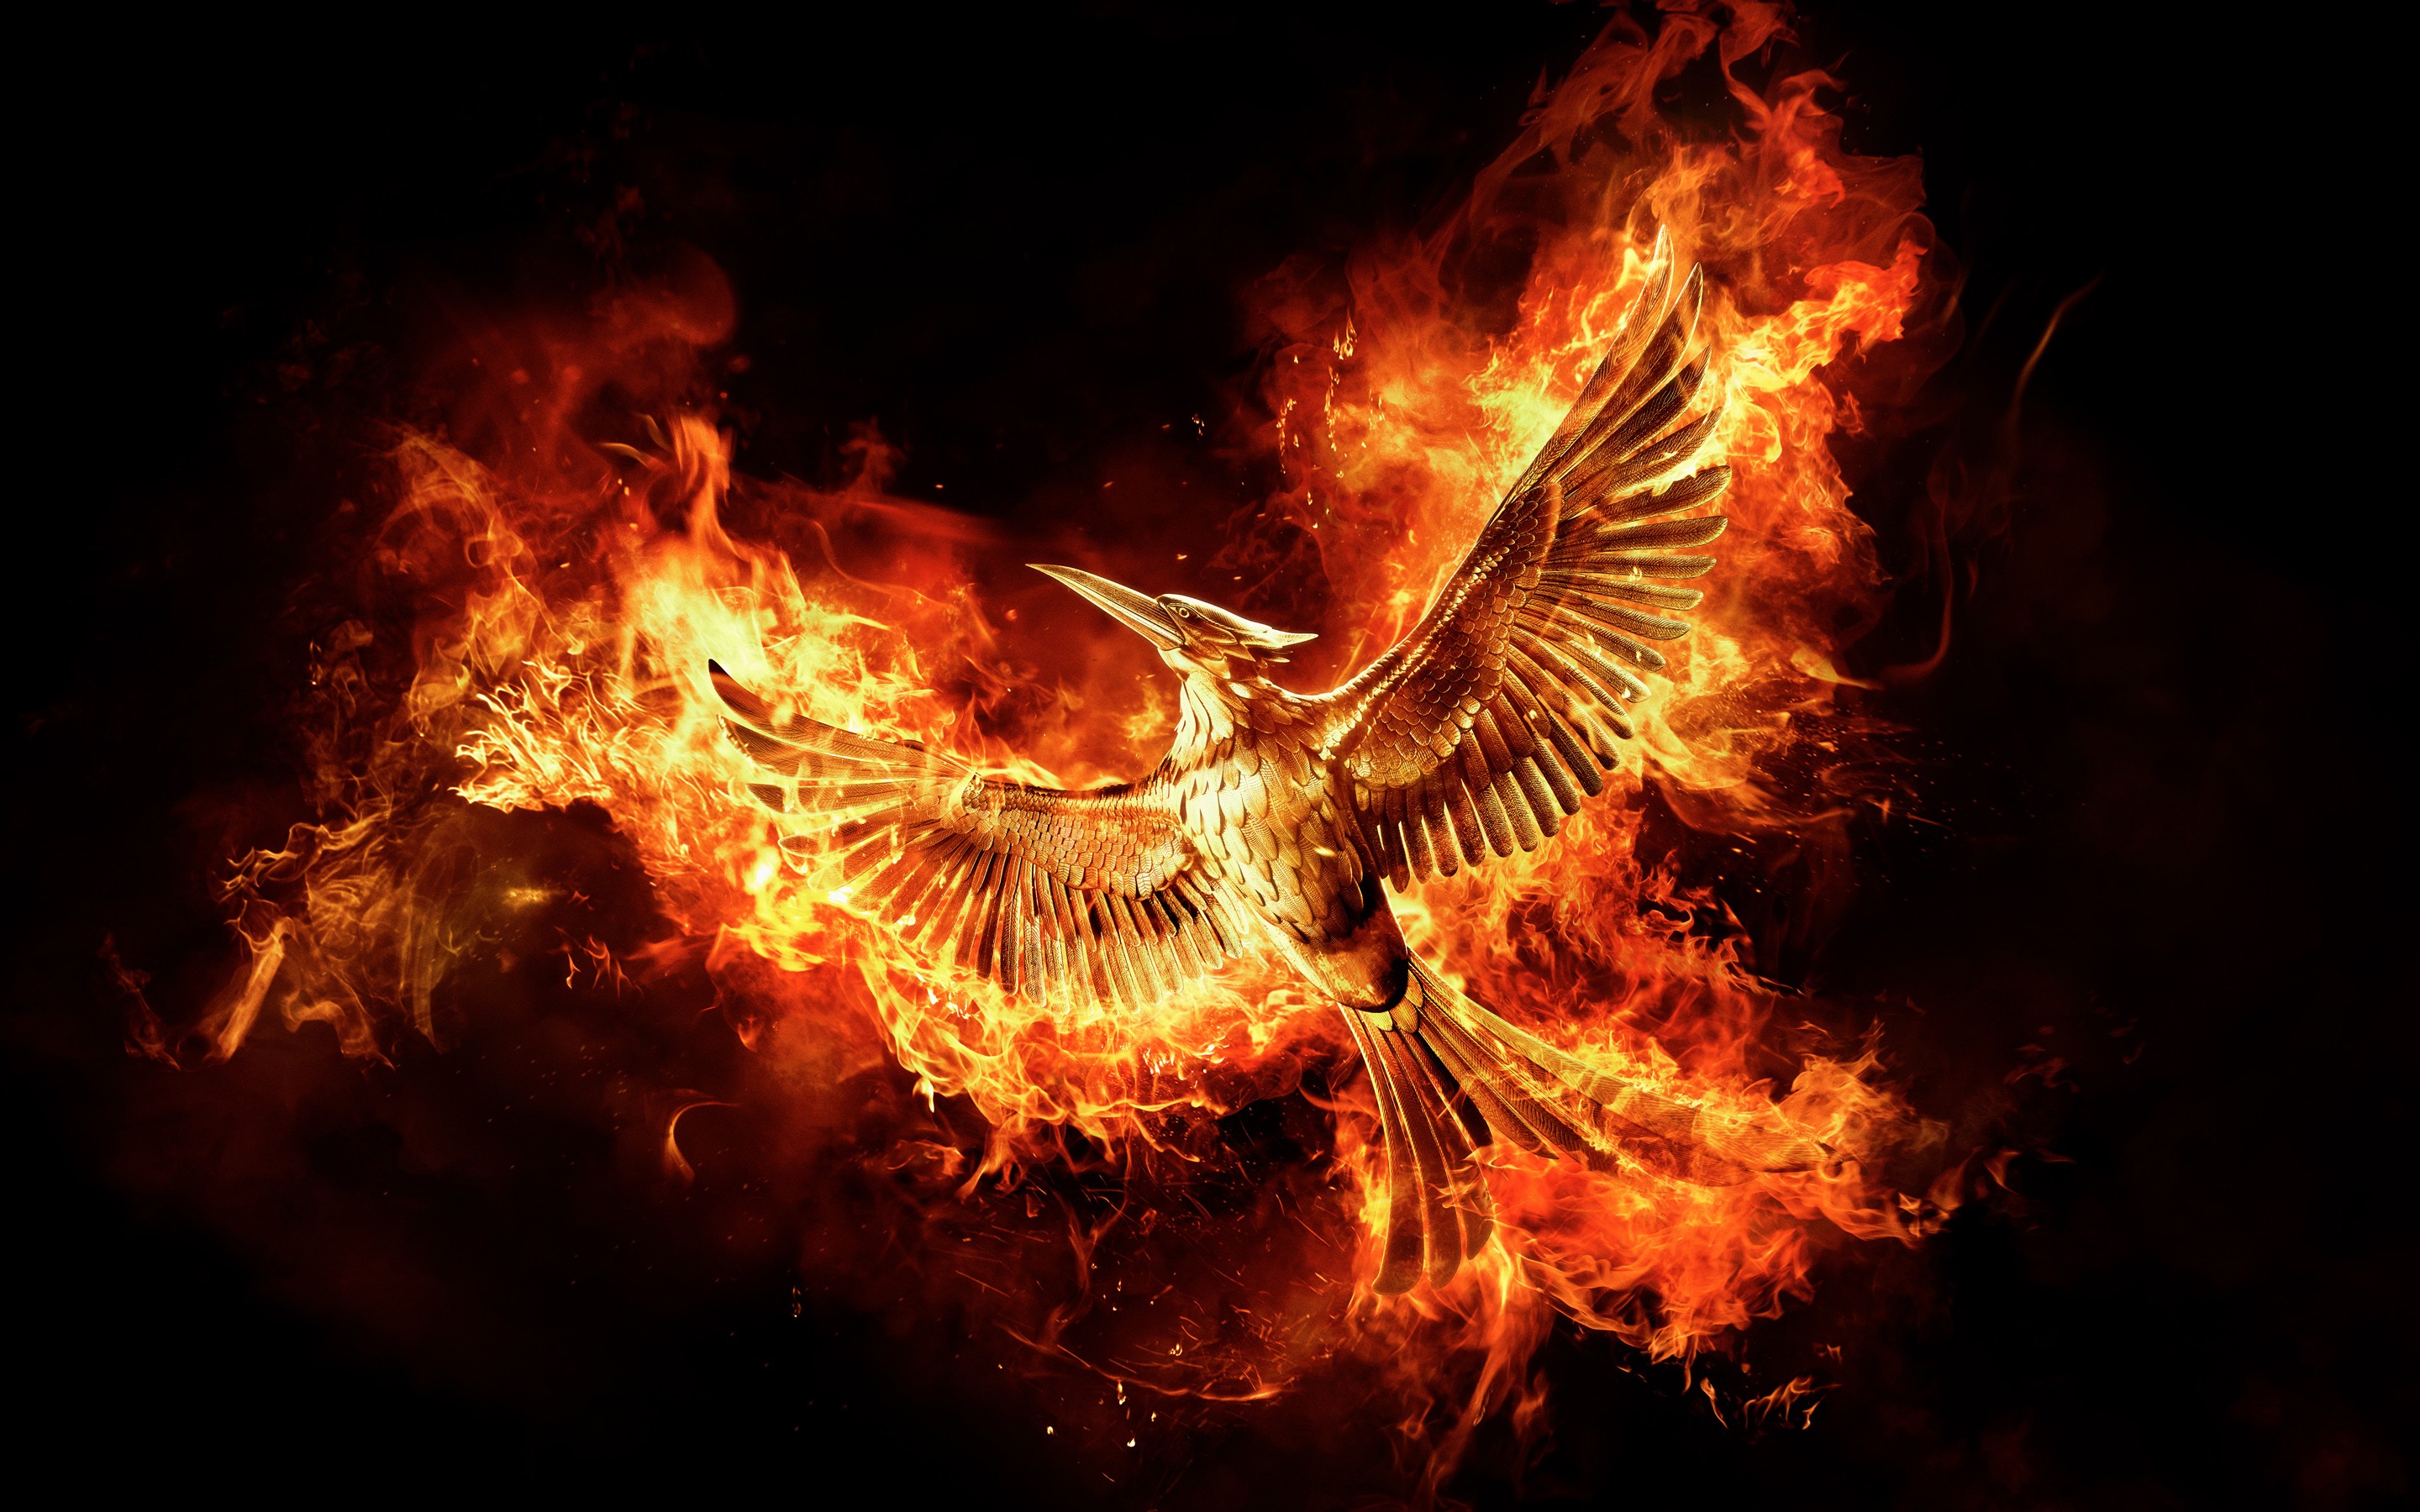 The Hunger Games MockingJay Part 2 Movie Wallpaper HD Backgrounds